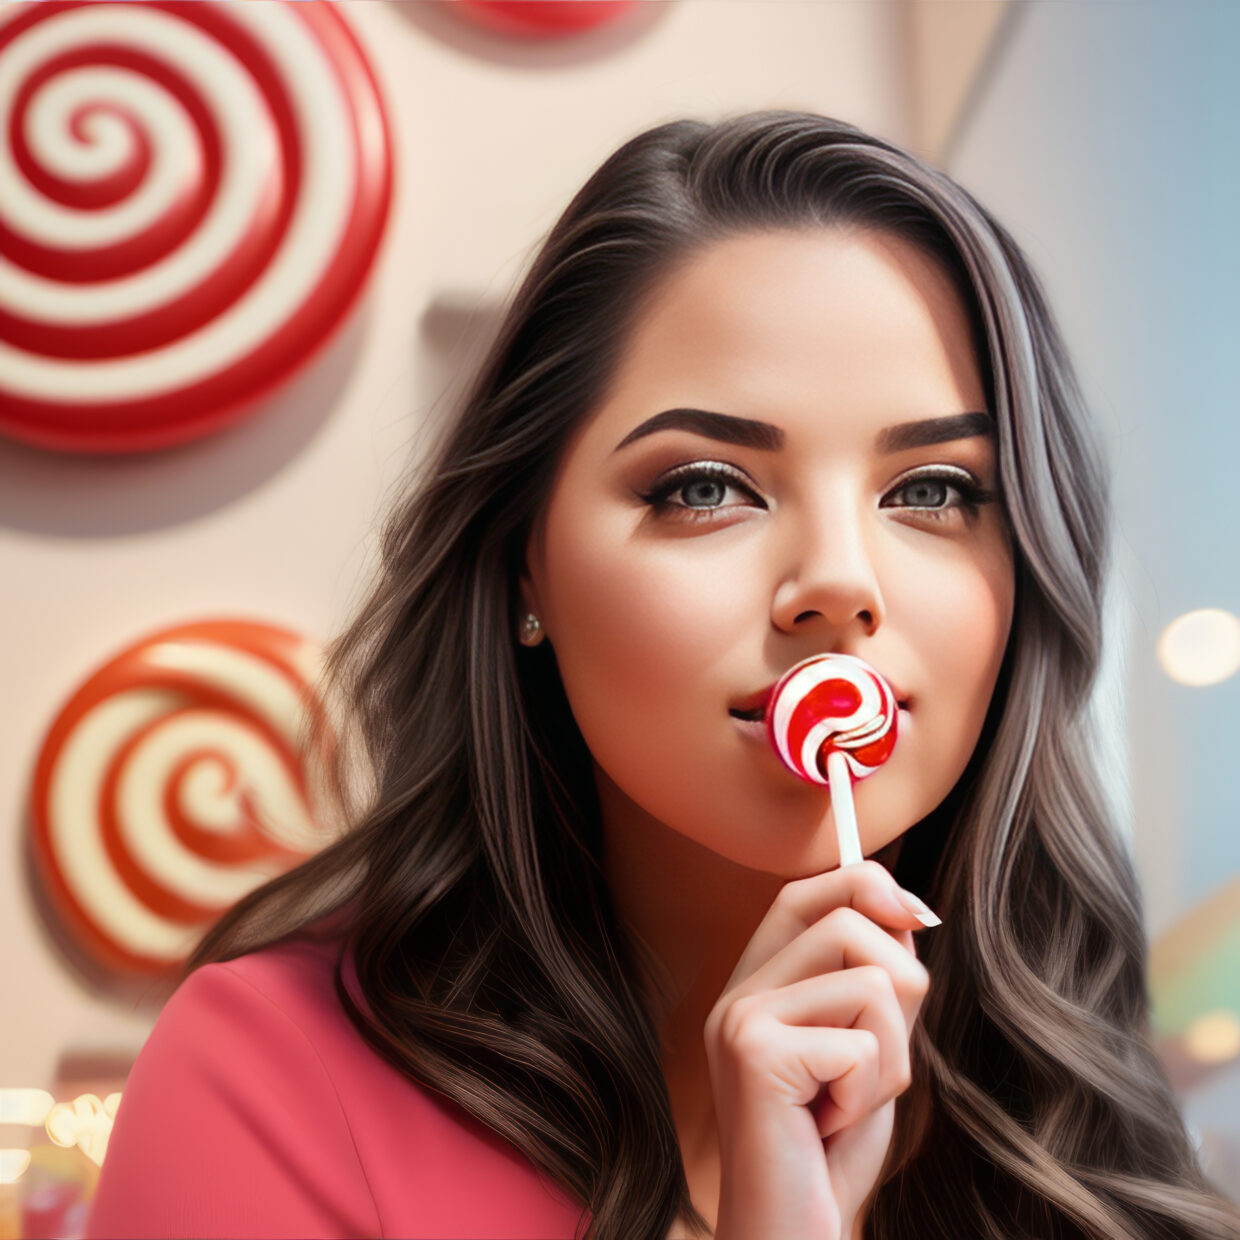 A candy-coated image of me, 3Daizy, with a lollipop.